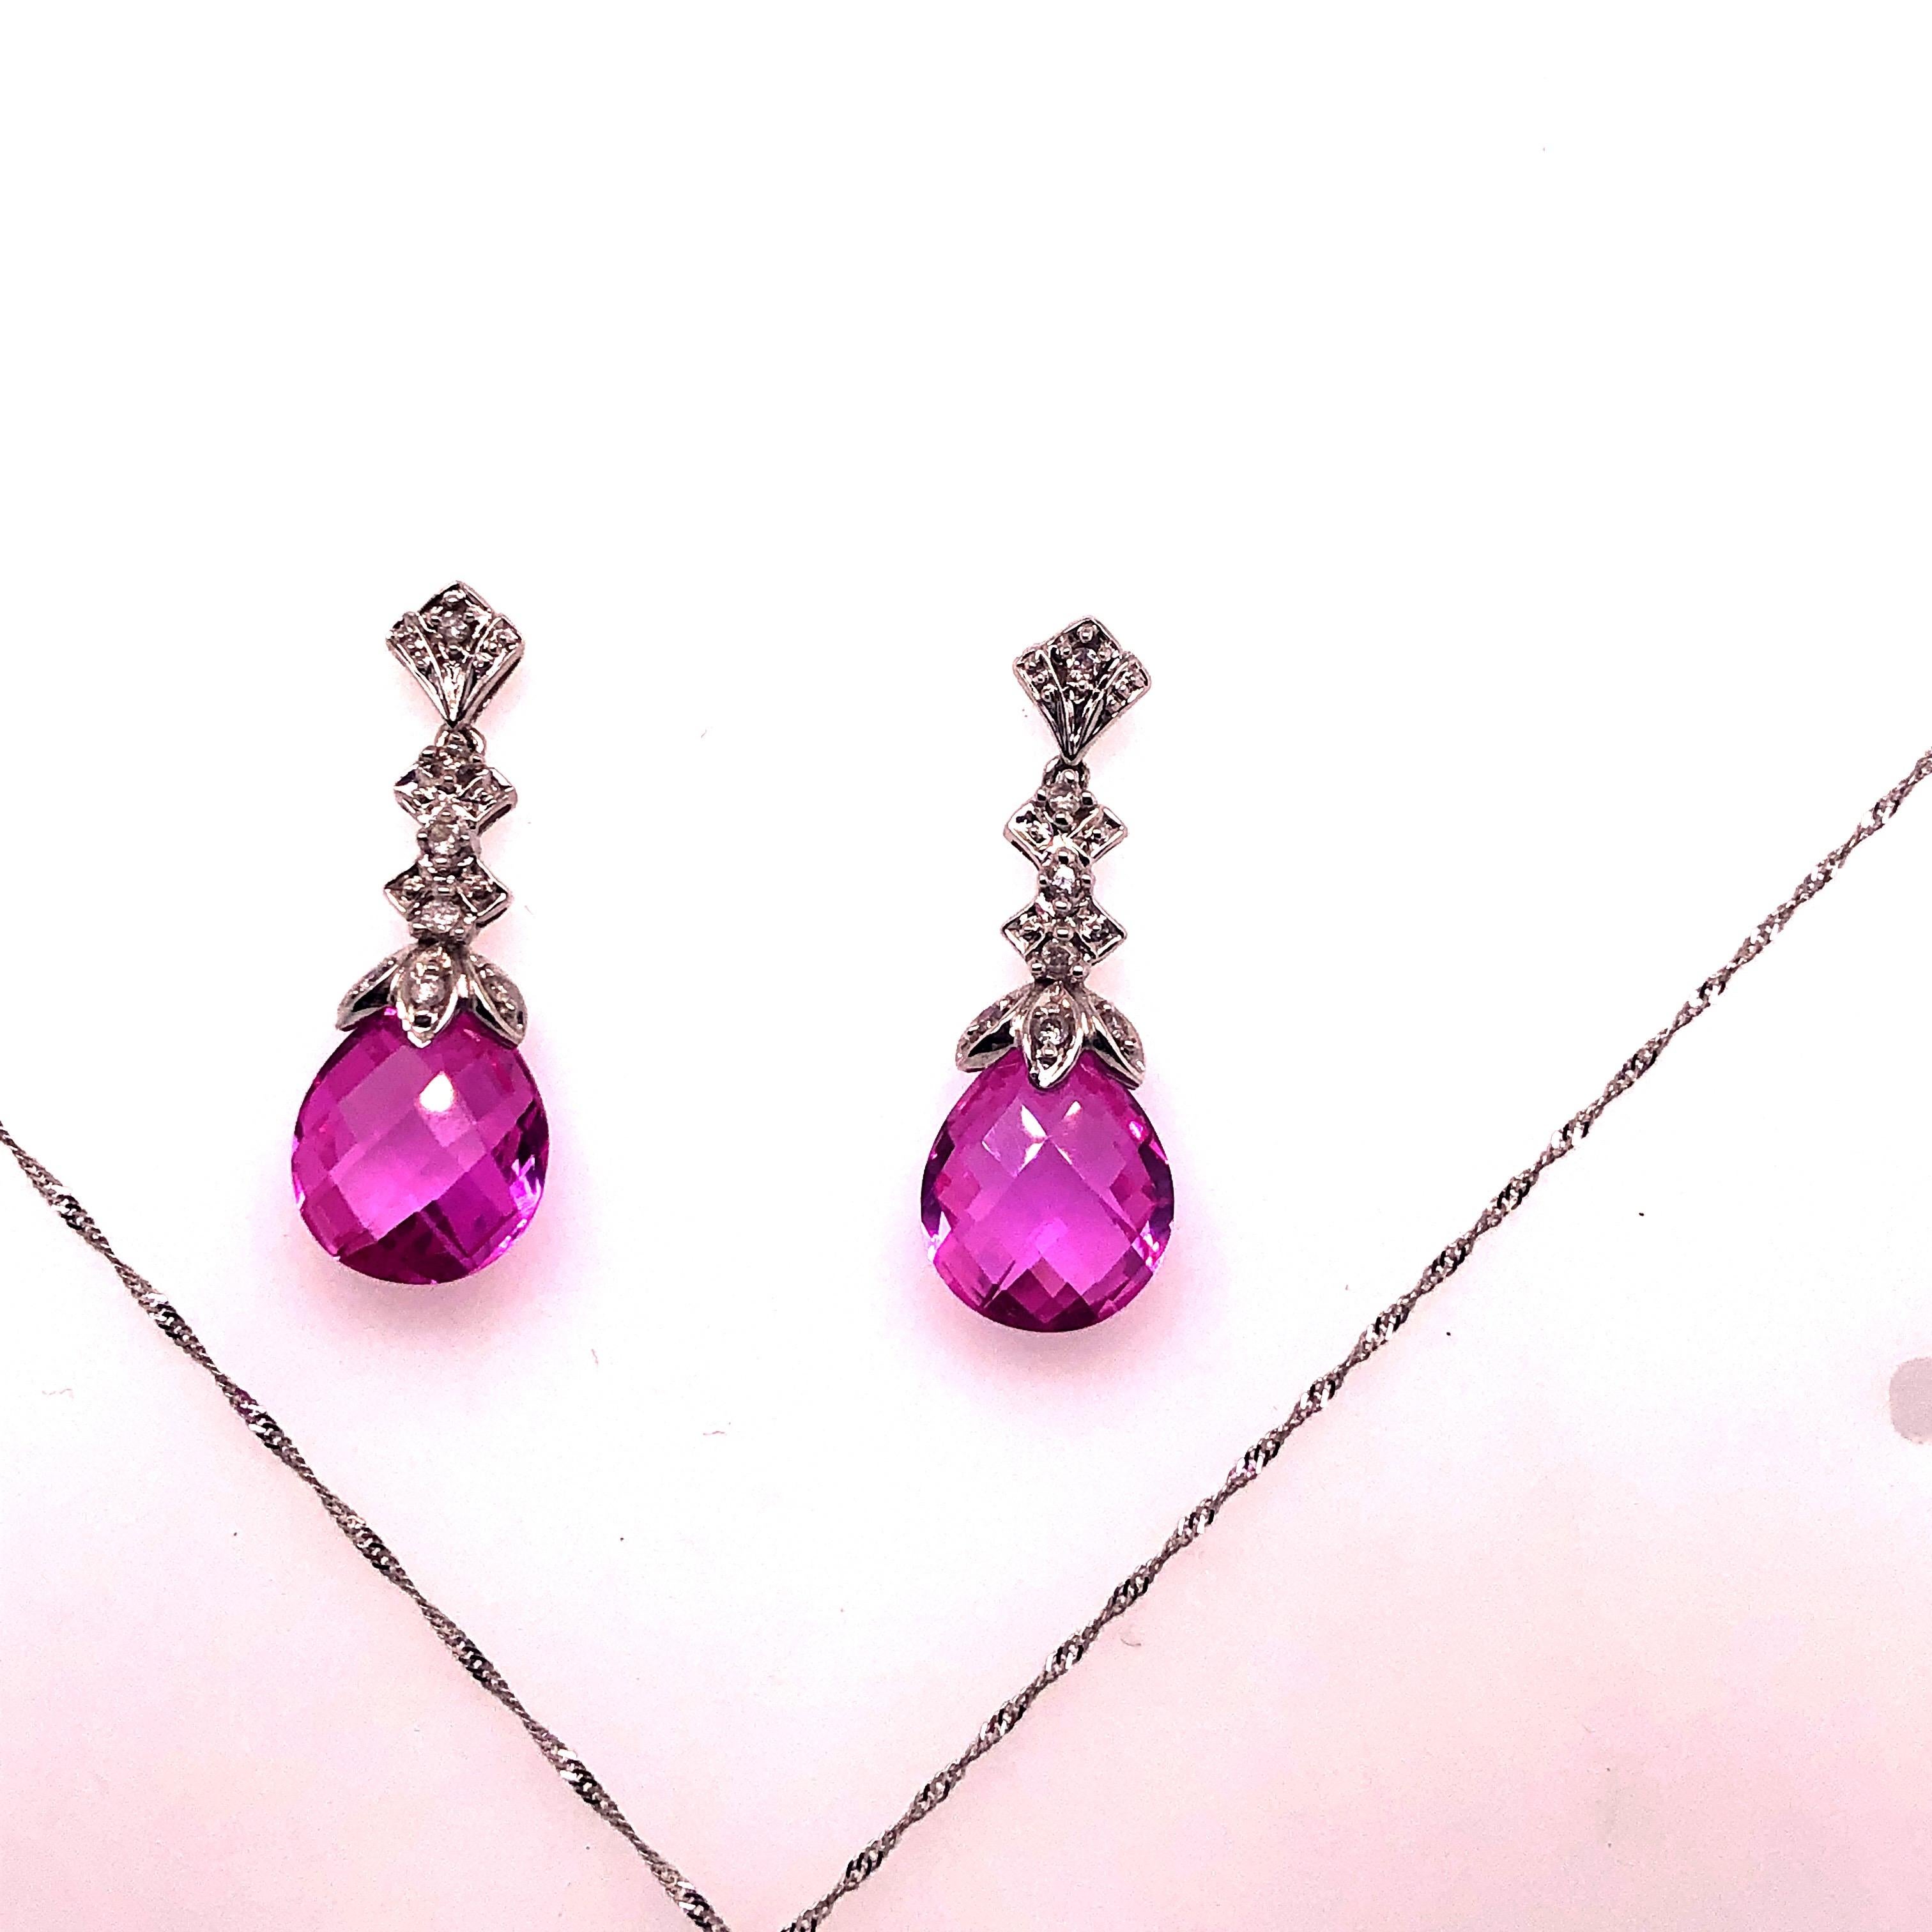 Women's White Gold Diamond and Pink Stone Earrings and Necklace